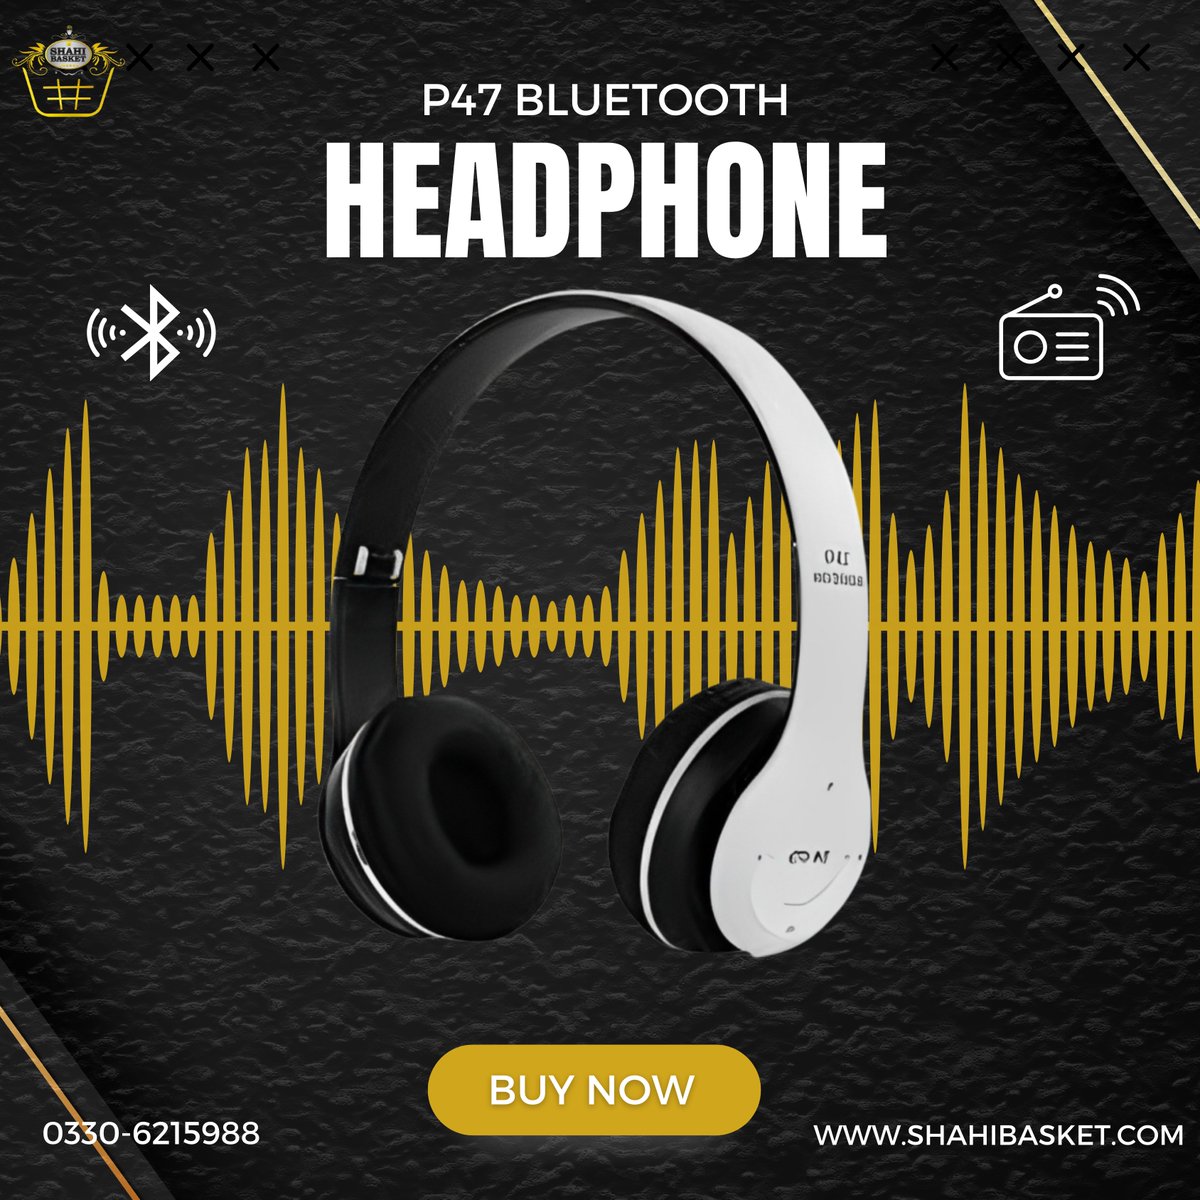 🎧 Upgrade your listening experience with our new P47 Wireless Headphones! 🎵

💰 And all of this comes at an affordable price of just Rs 1500

#WirelessHeadphones #P47Model #Bluetooth #NoiseReduction #FM #AffordablePrice #MusicOnTheGo #ElevateYourSound #MusicLover #Shahibasket